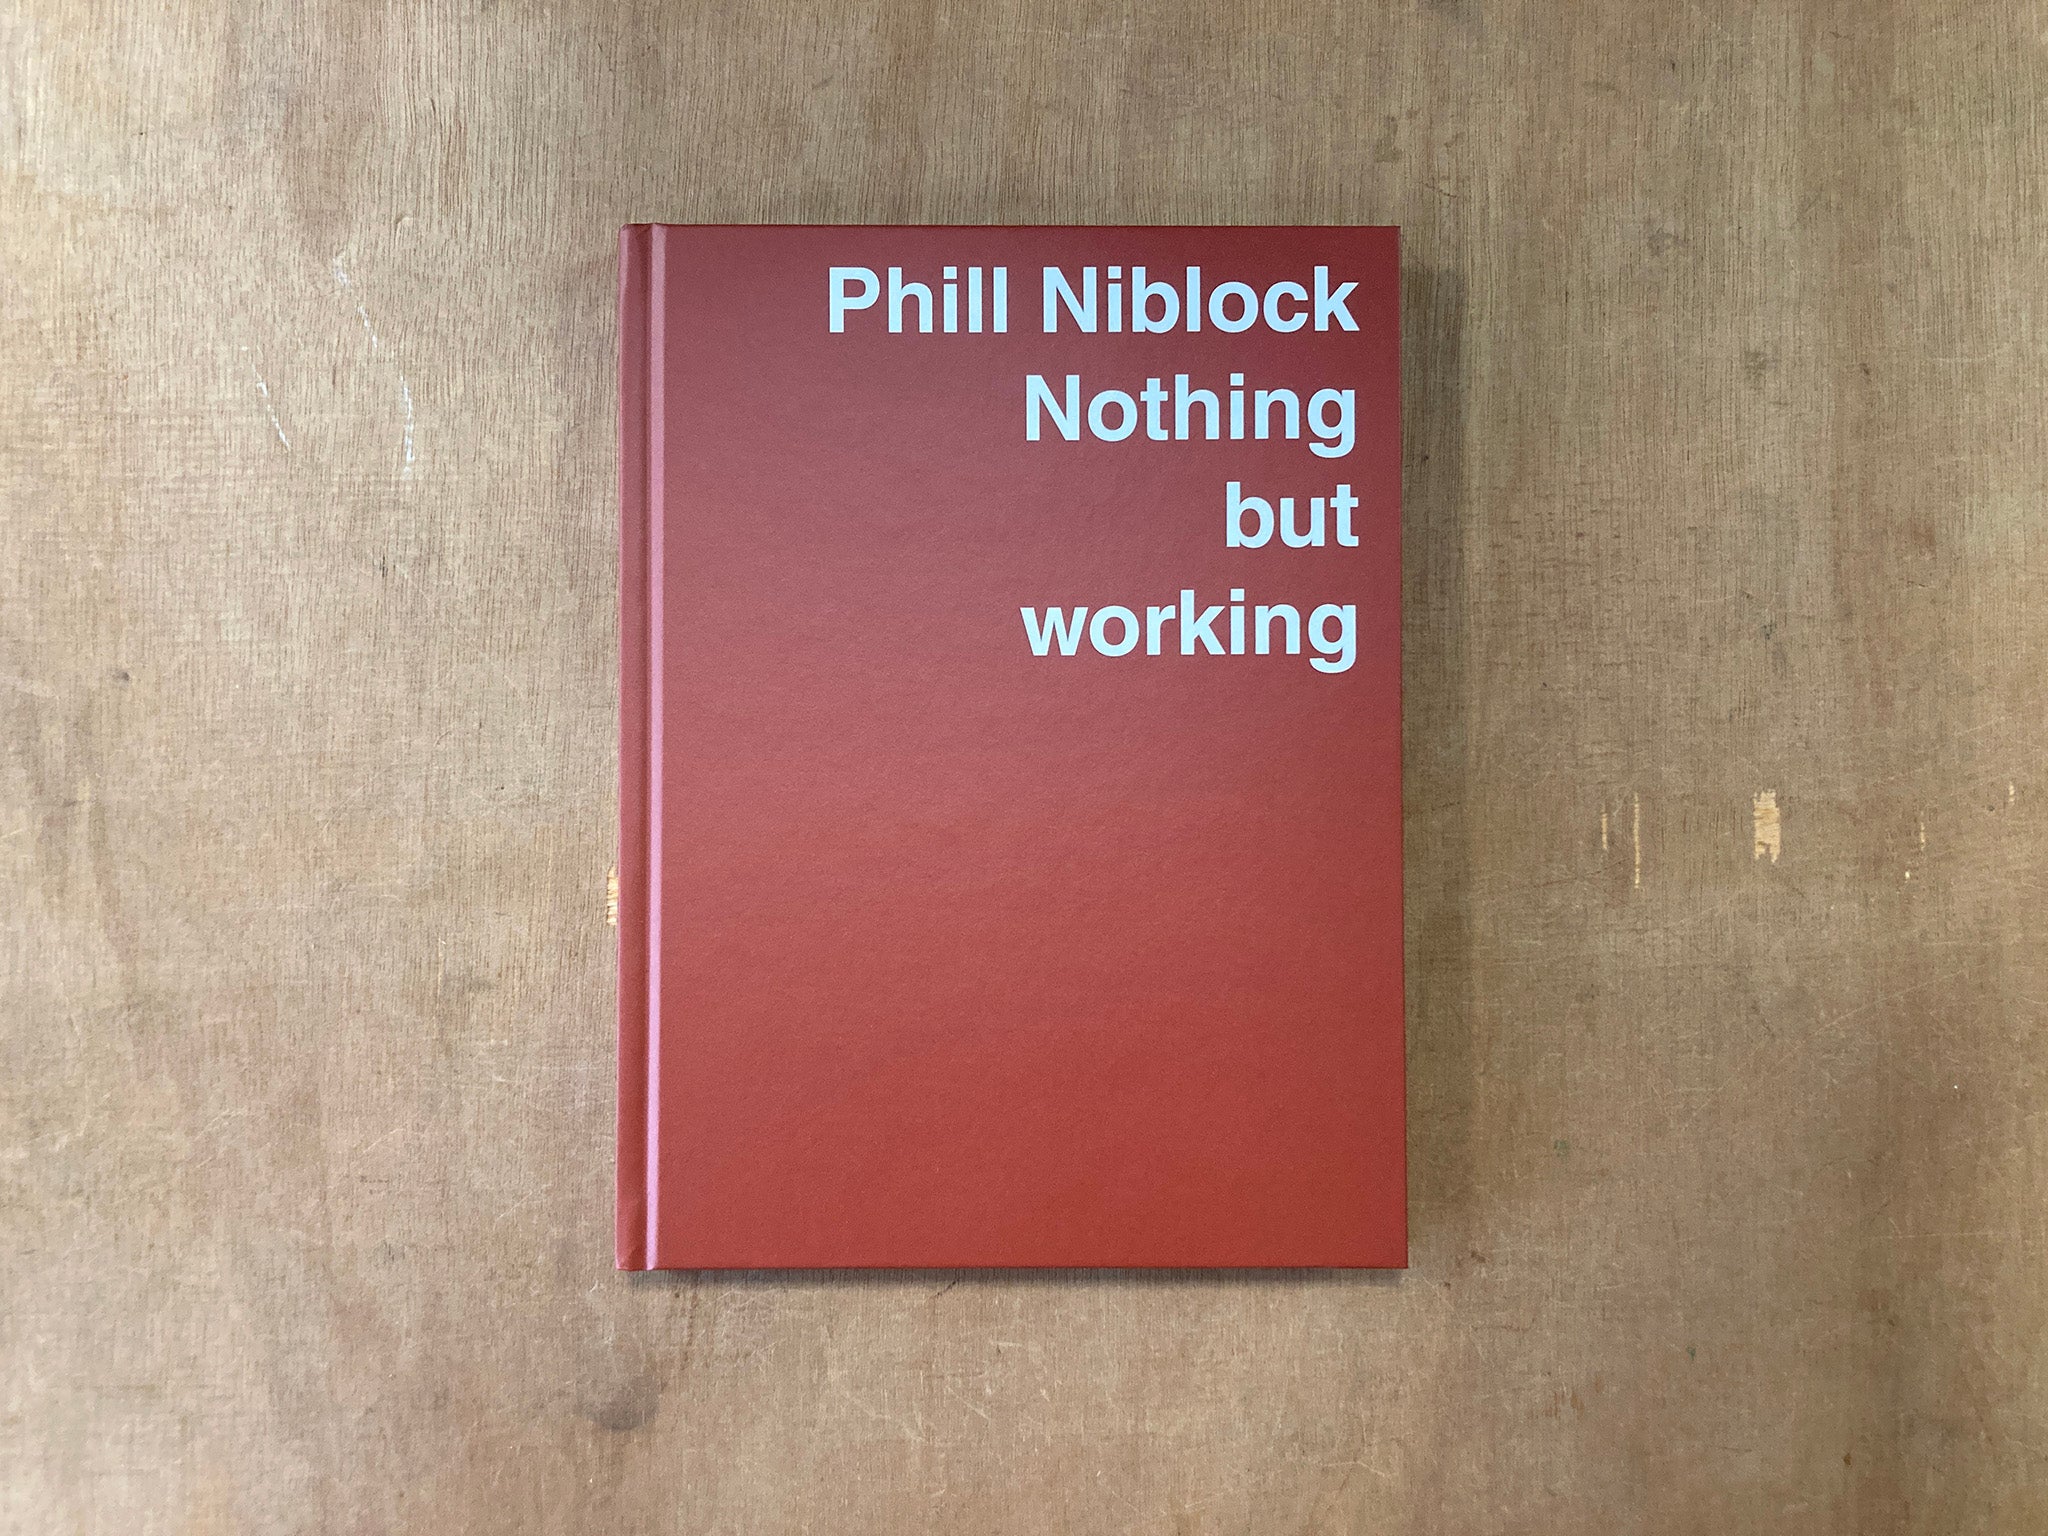 PHILL NIBLOCK: NOTHING BUT WORKING - A RETROSPECTIVE edited by Mathieu Copeland